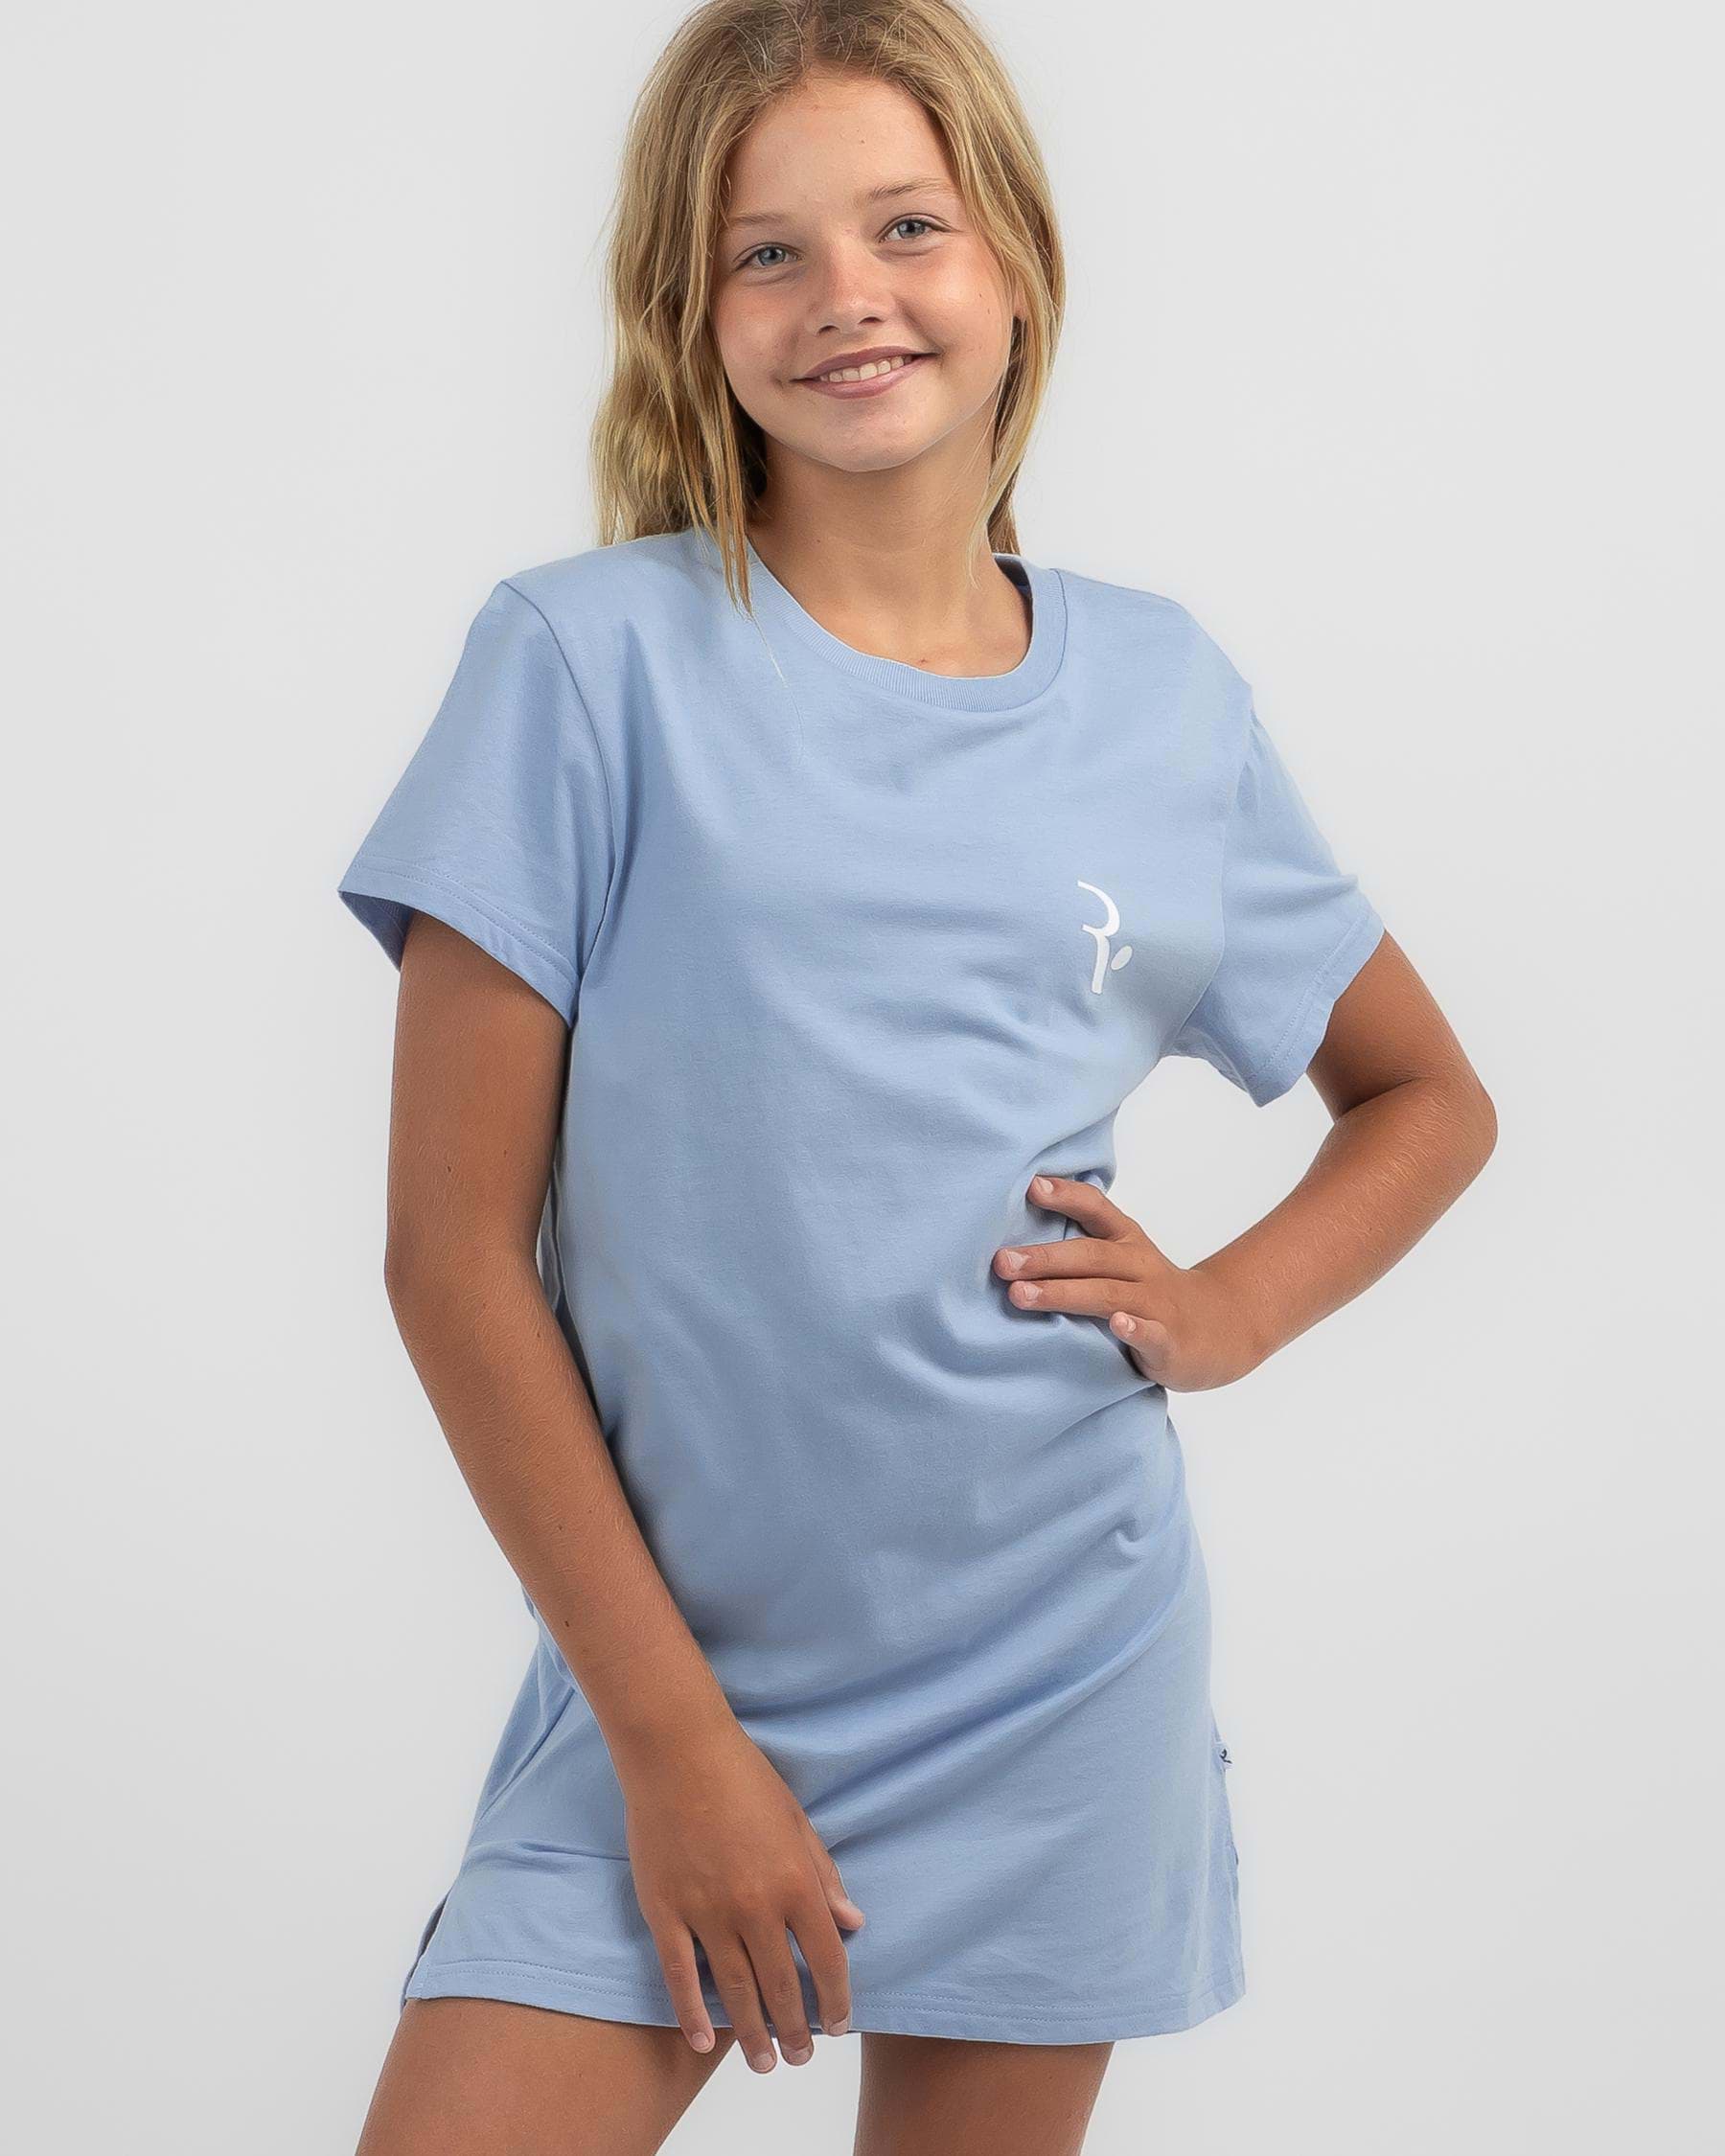 Rusty Girls' Signature Tee Dress In Glacial Blue - Fast Shipping & Easy ...